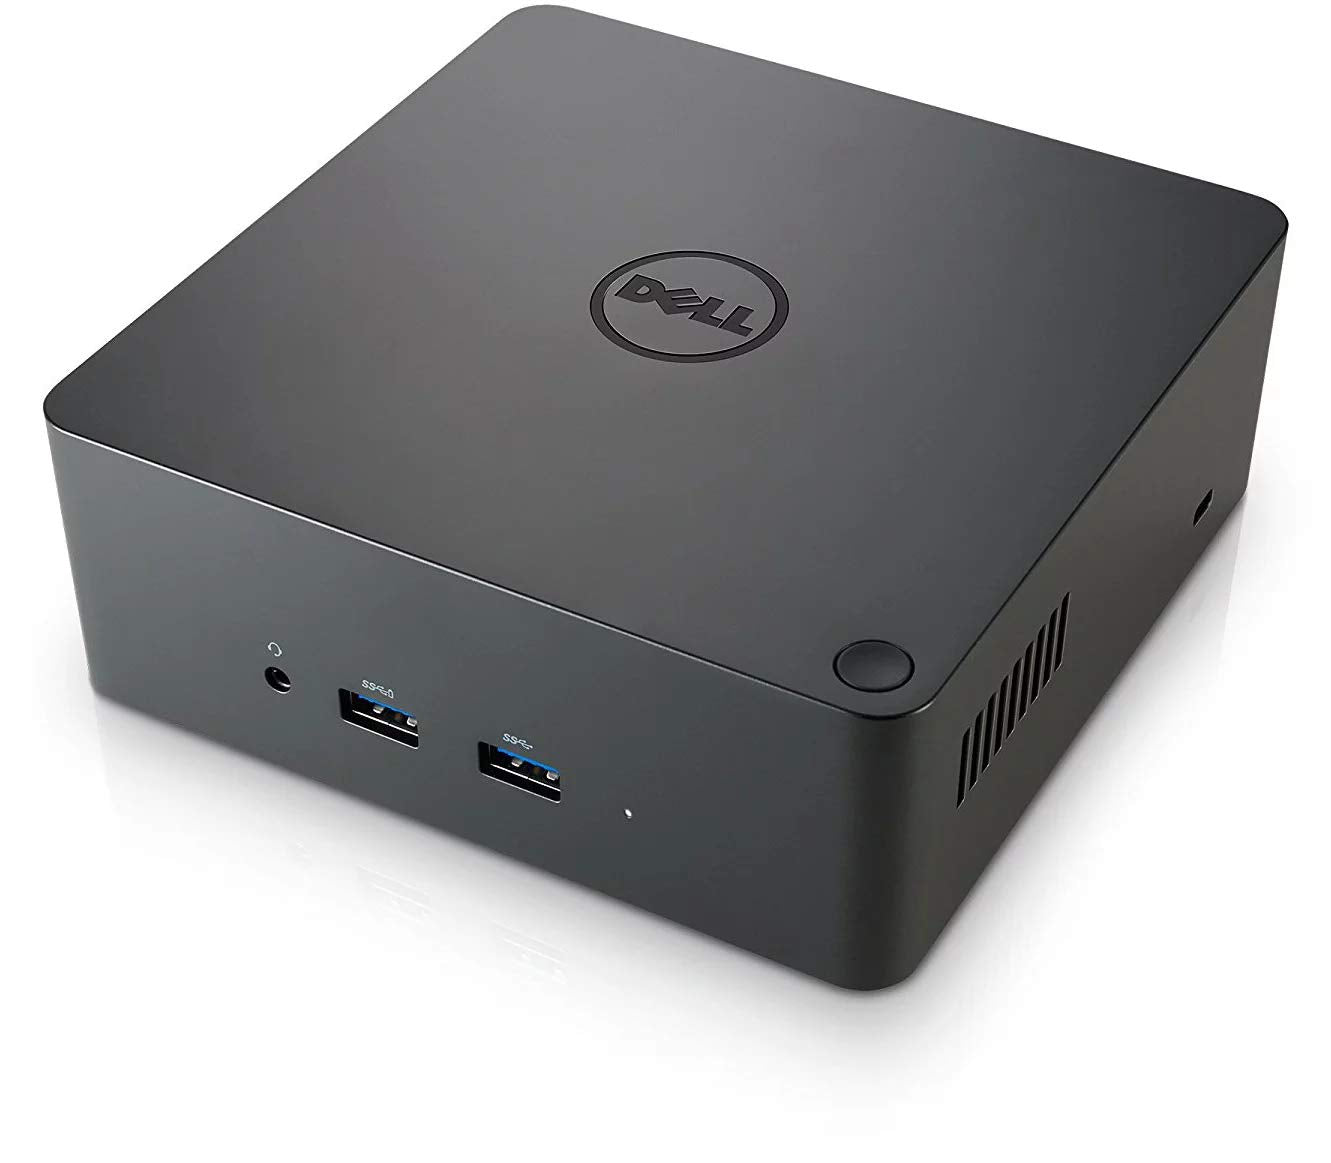 Dell TB16 Thunderbolt 3 (USB-C) Docking Station with 180W Adapter - Refurbished Excellent Condition